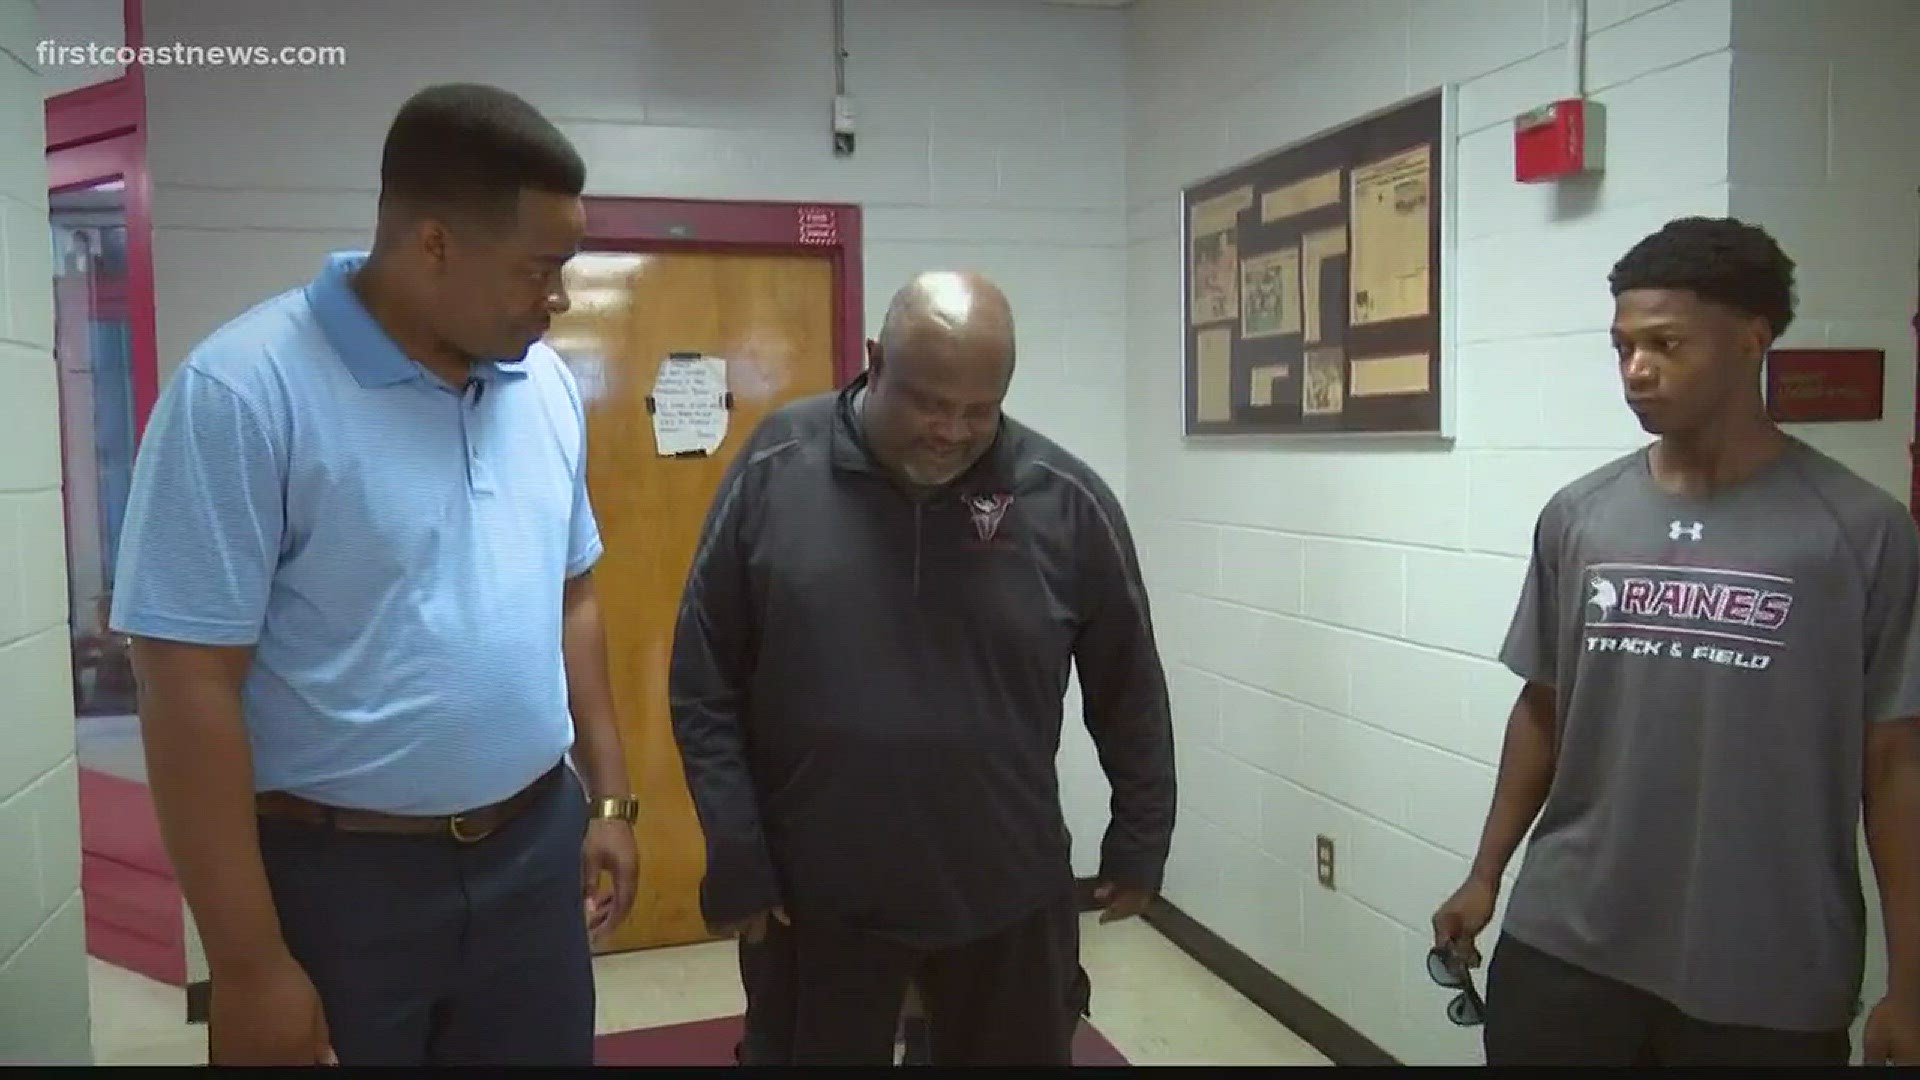 Raines Vikings Coach Bellamy was battling with his health, but showed determination he will walk again... and he did.